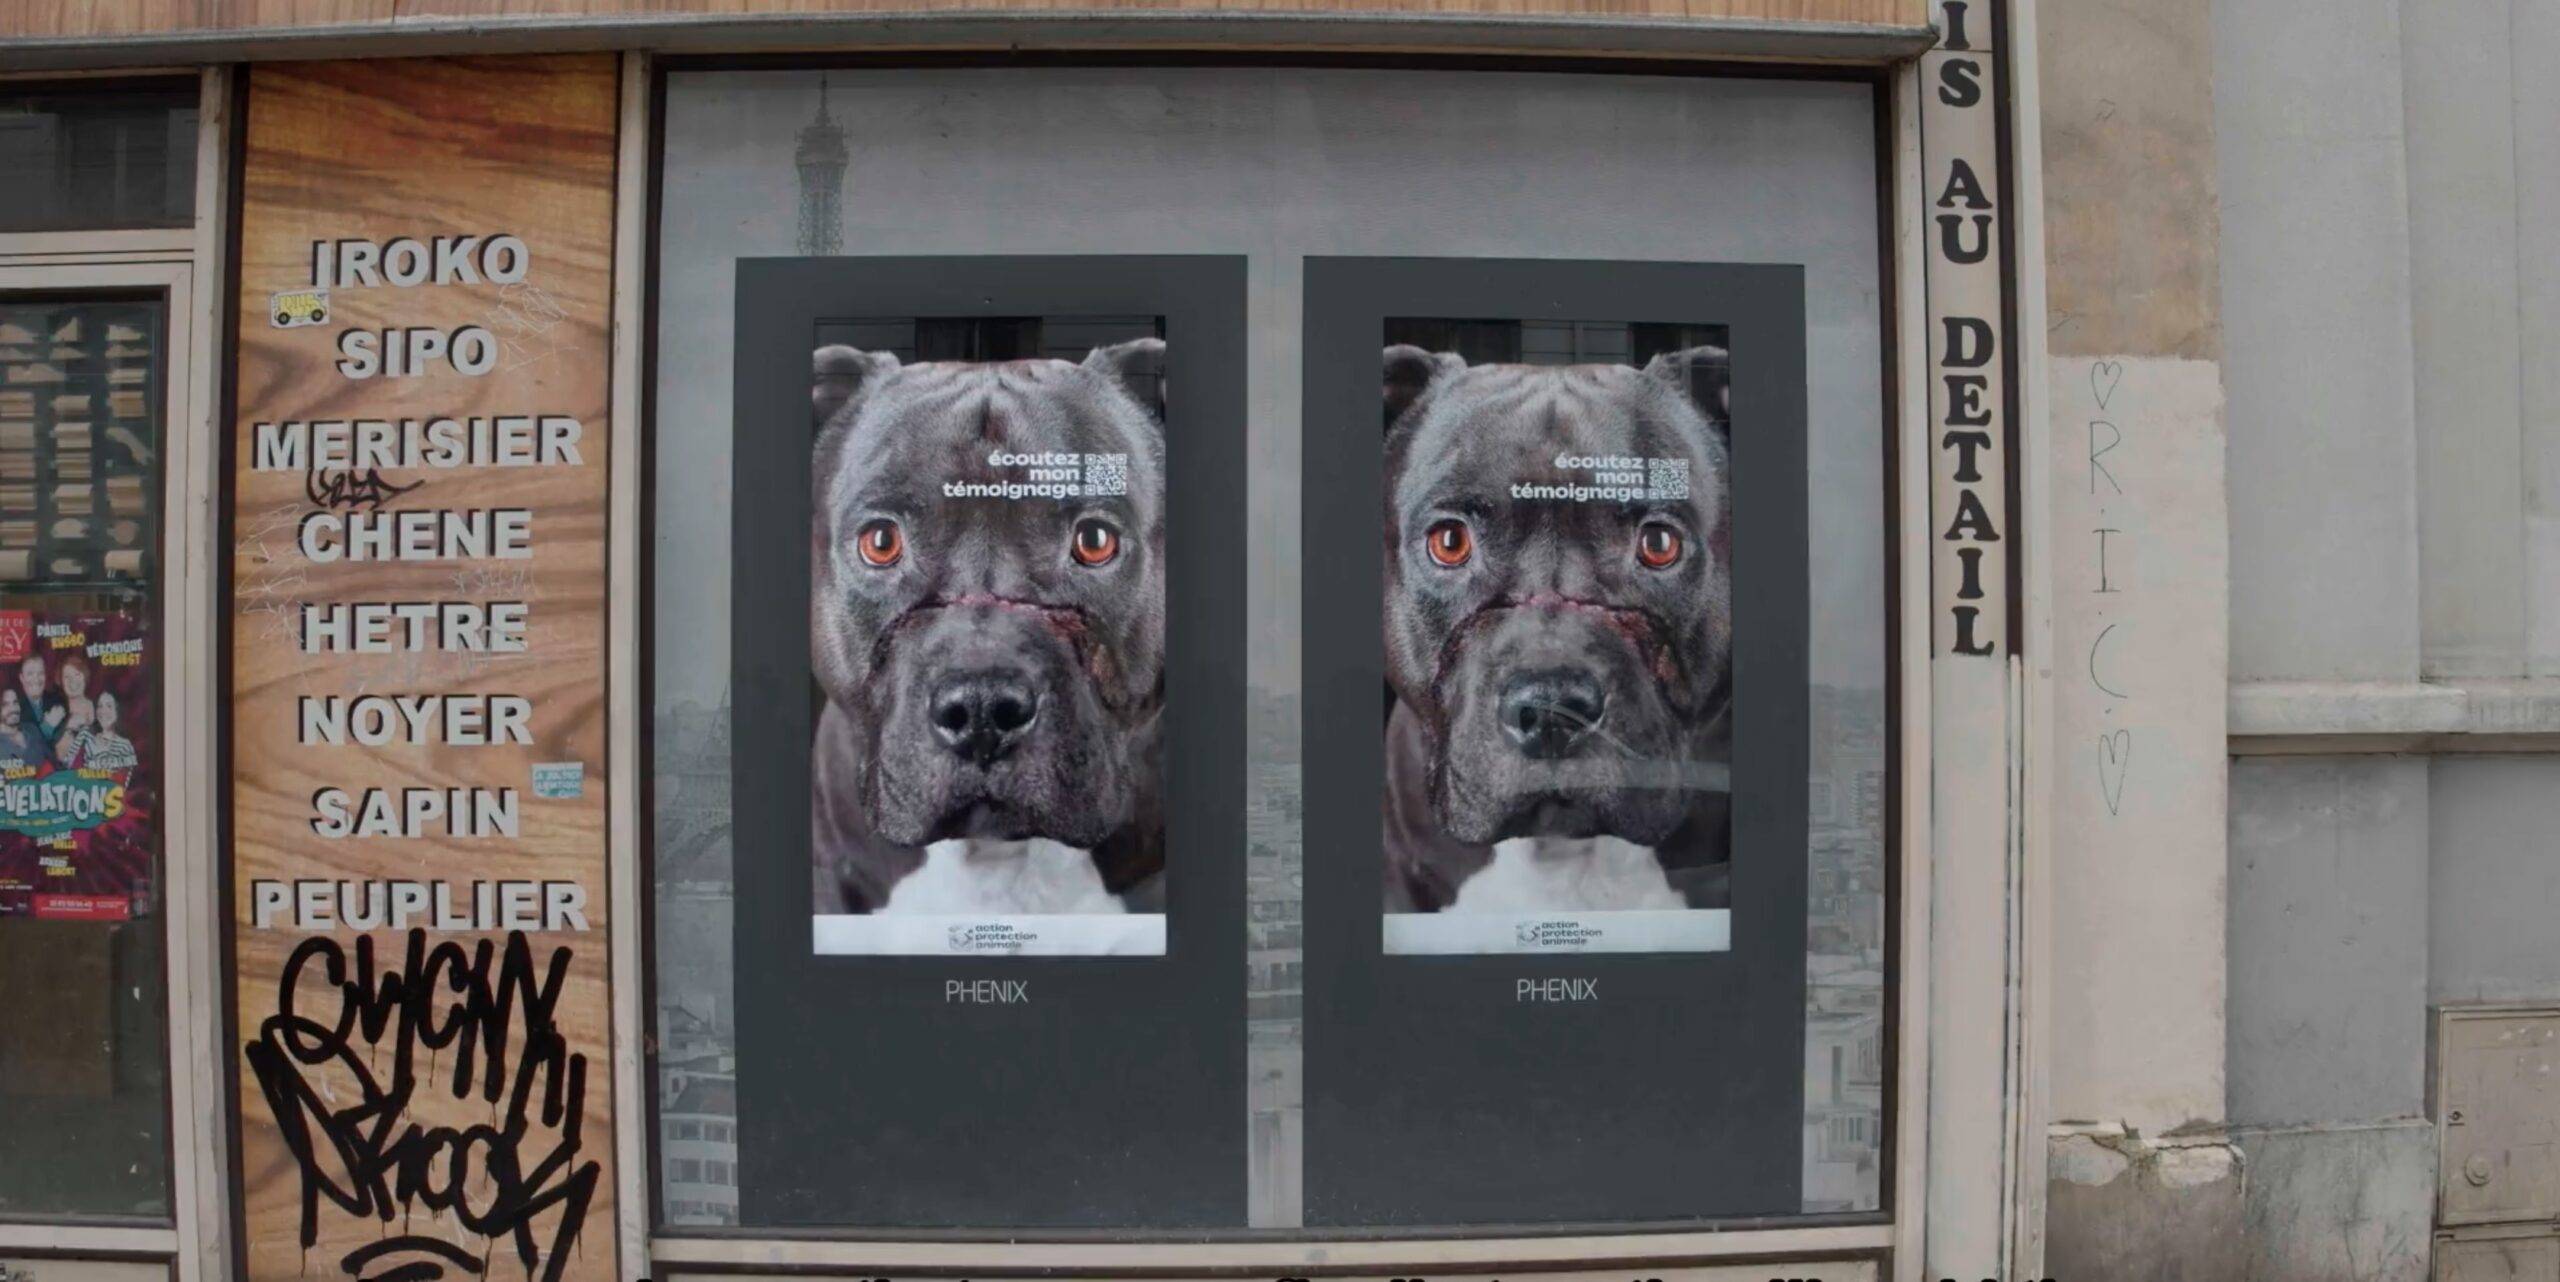 Posters for the APA campaign against animal abuse